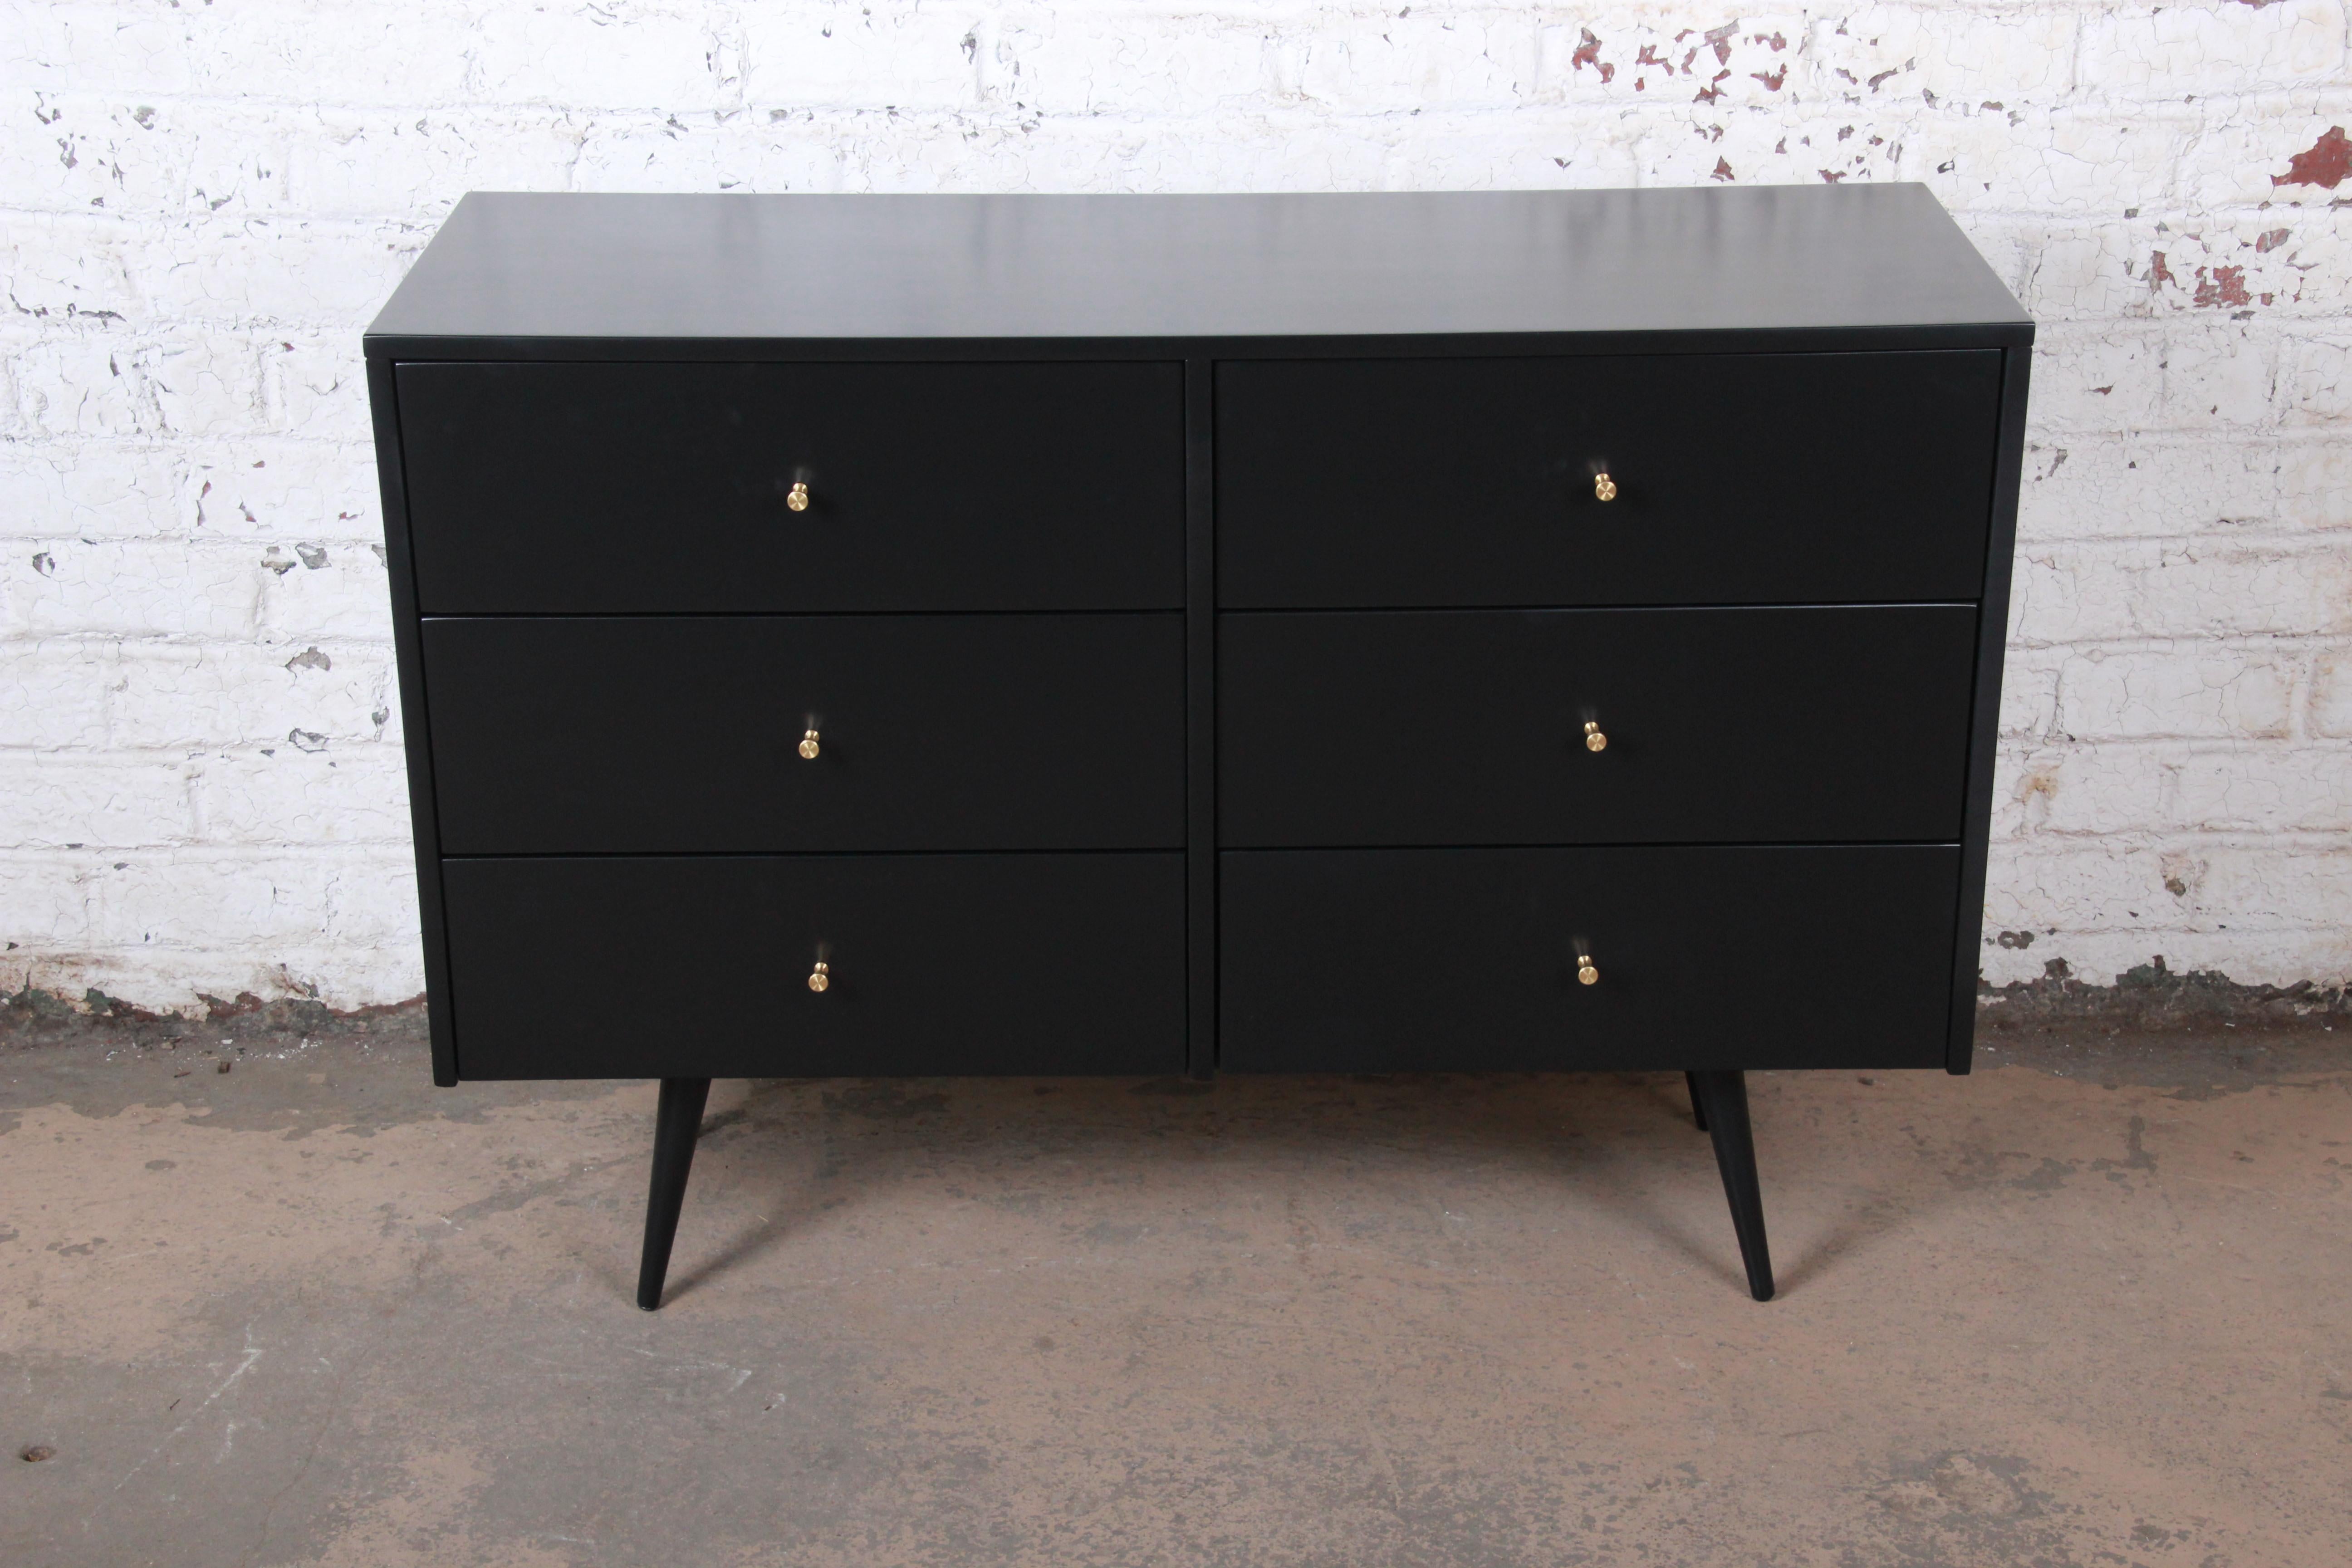 An exceptional Mid-Century Modern six-drawer dresser or credenza

Designed by Paul McCobb for Winchendon Furniture 